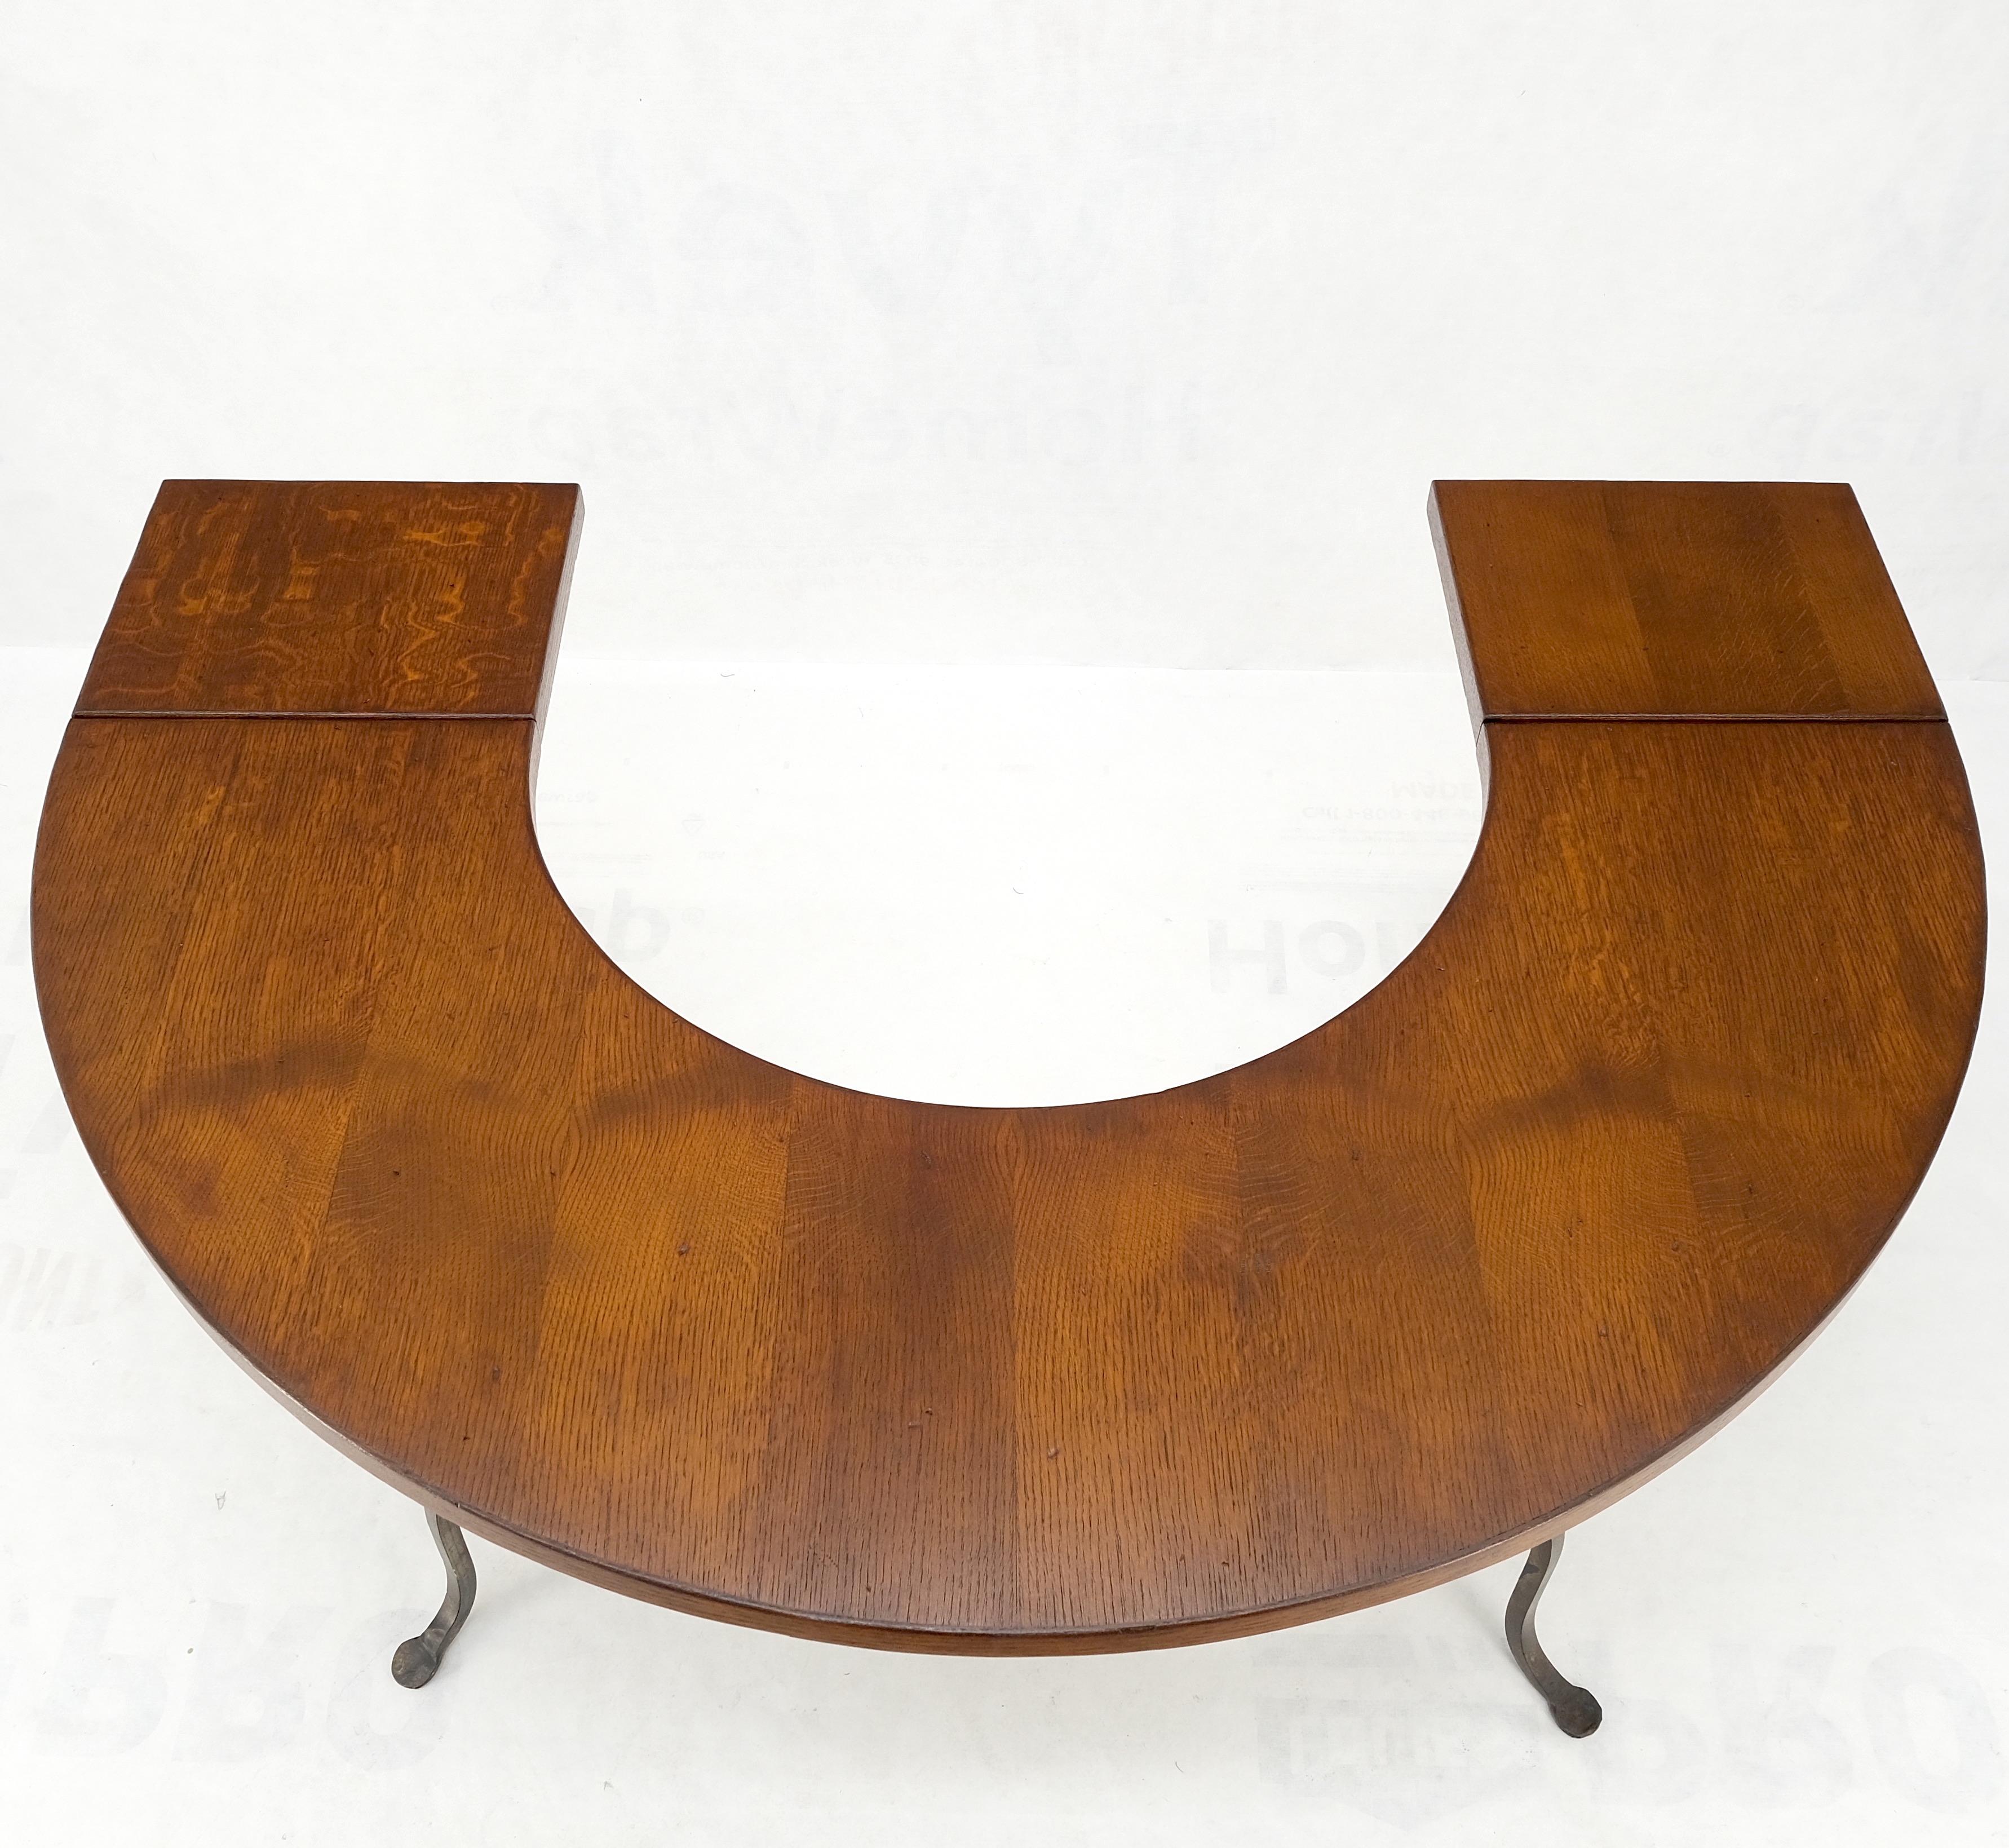 Half Round Horse Shoe Shape Drop Leaf Ends Serving Writing Library Gallery Table For Sale 2